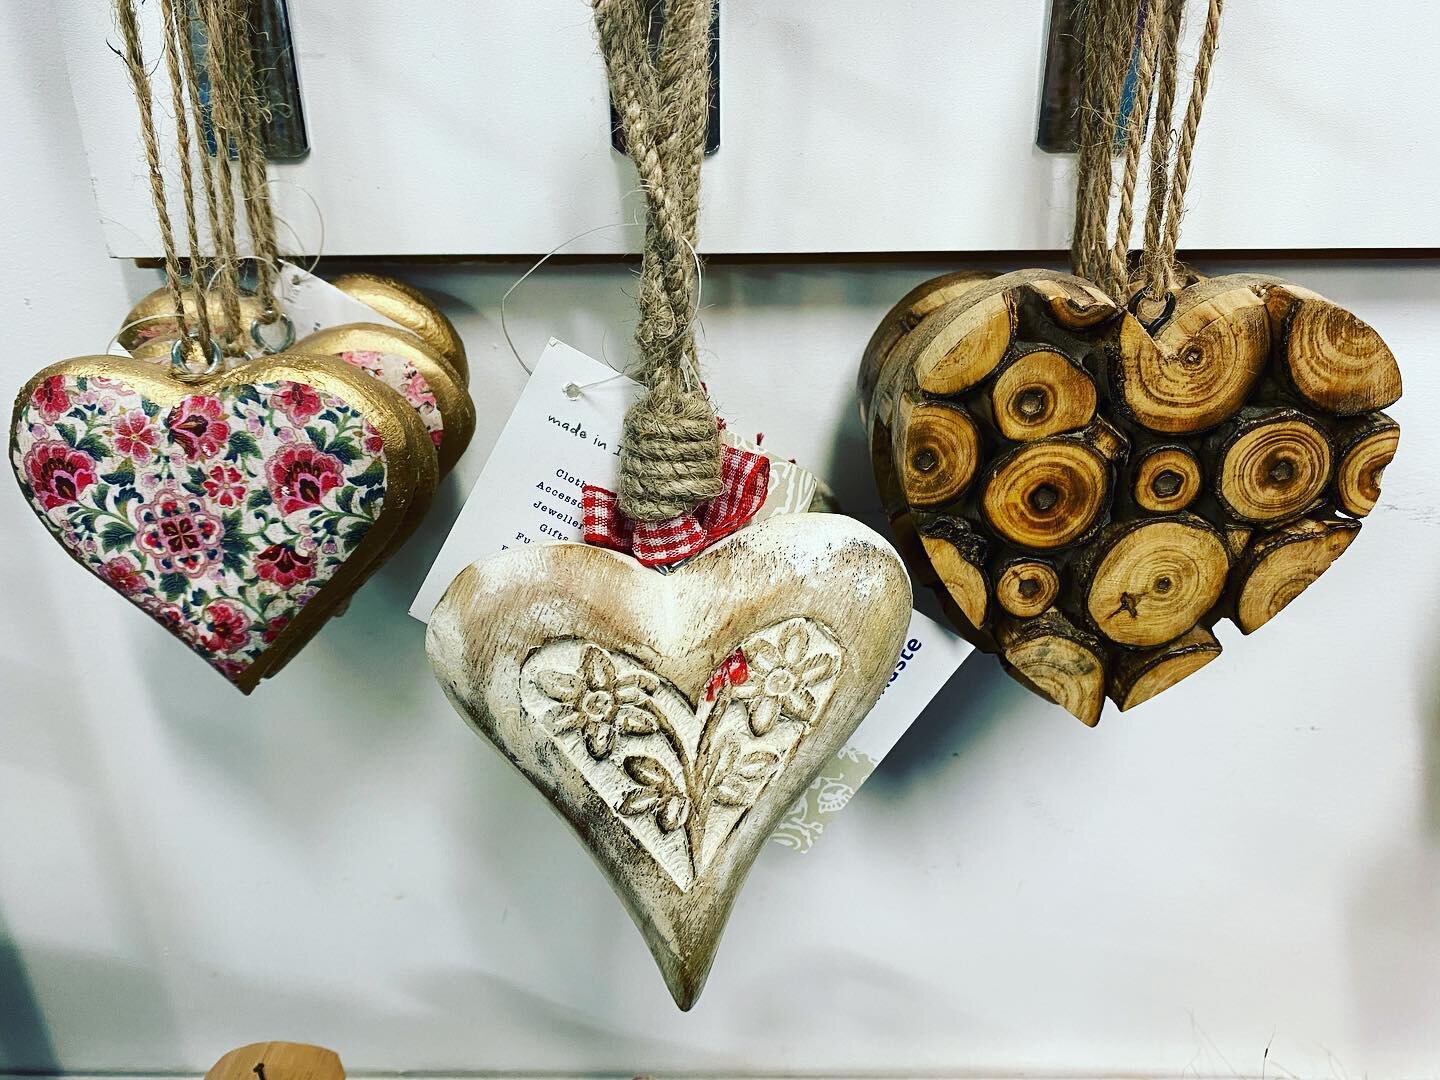 If a heart is an expression of love then our shop is filled with love, so do pop in for your share of it!  #heart #heartdecoration #fairtrade #handcarved